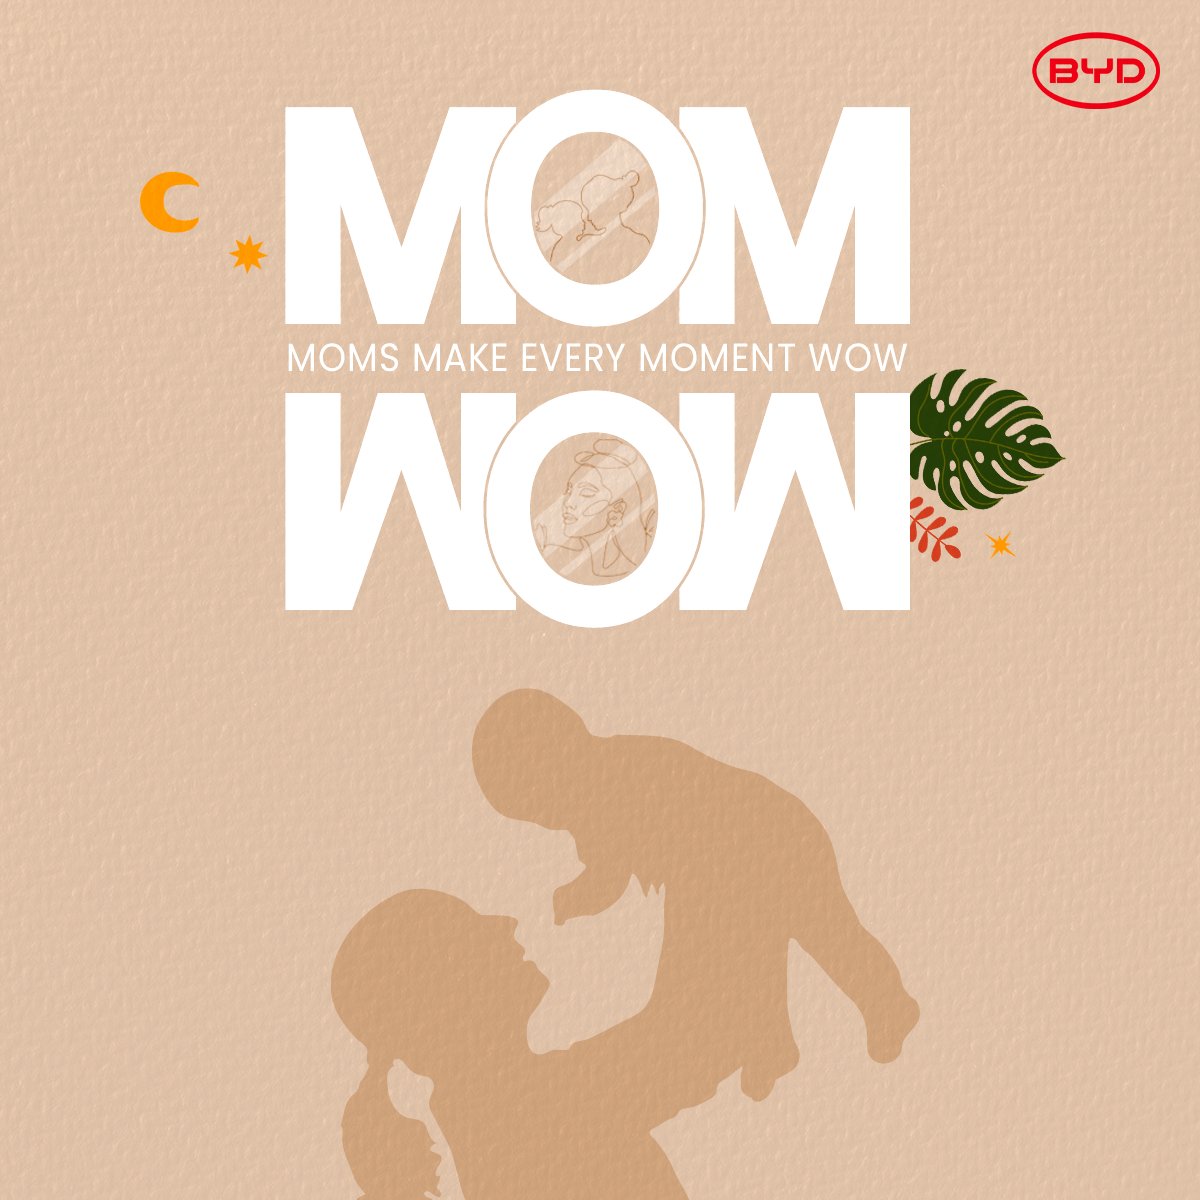 Happy Mother's Day! Let's thank moms for making every moment a wow! 💖

#BYD #BuildYourDreams #MothersDay